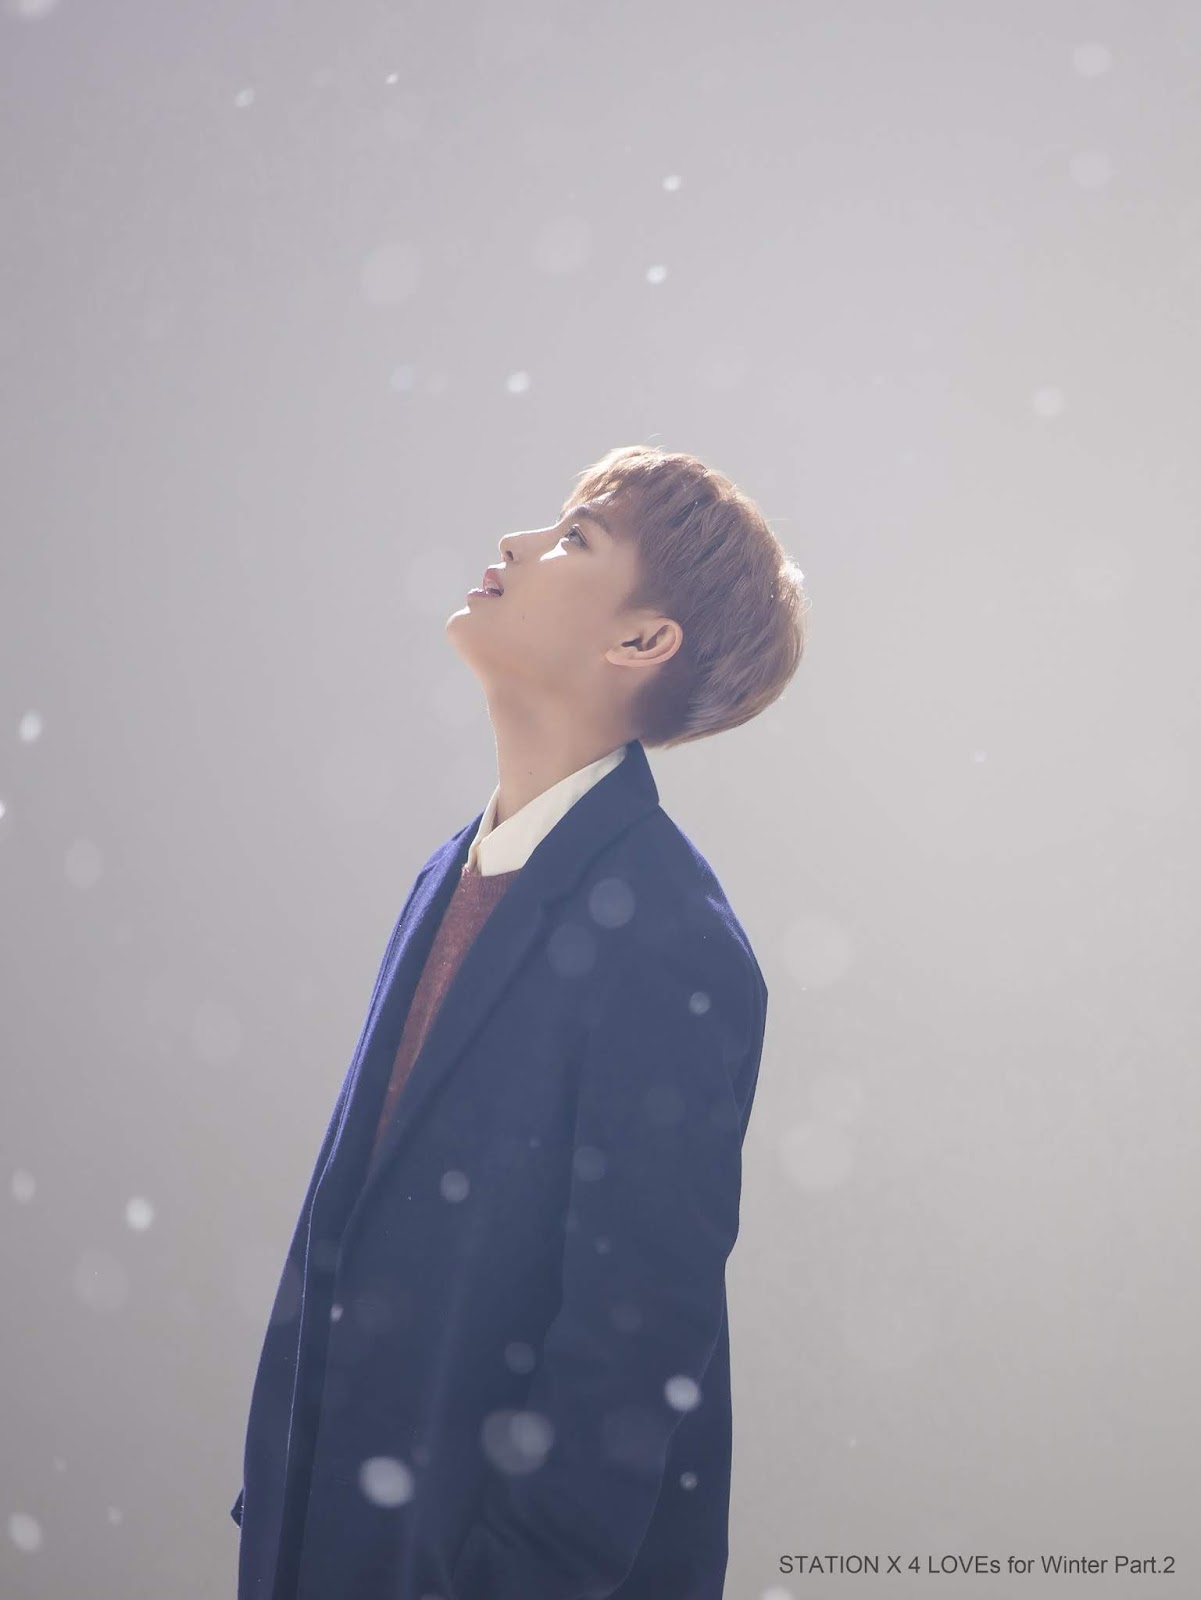 NCT U's Taeil and Doyoung Posing under Snowfall in the ‘Coming Home’ Teaser